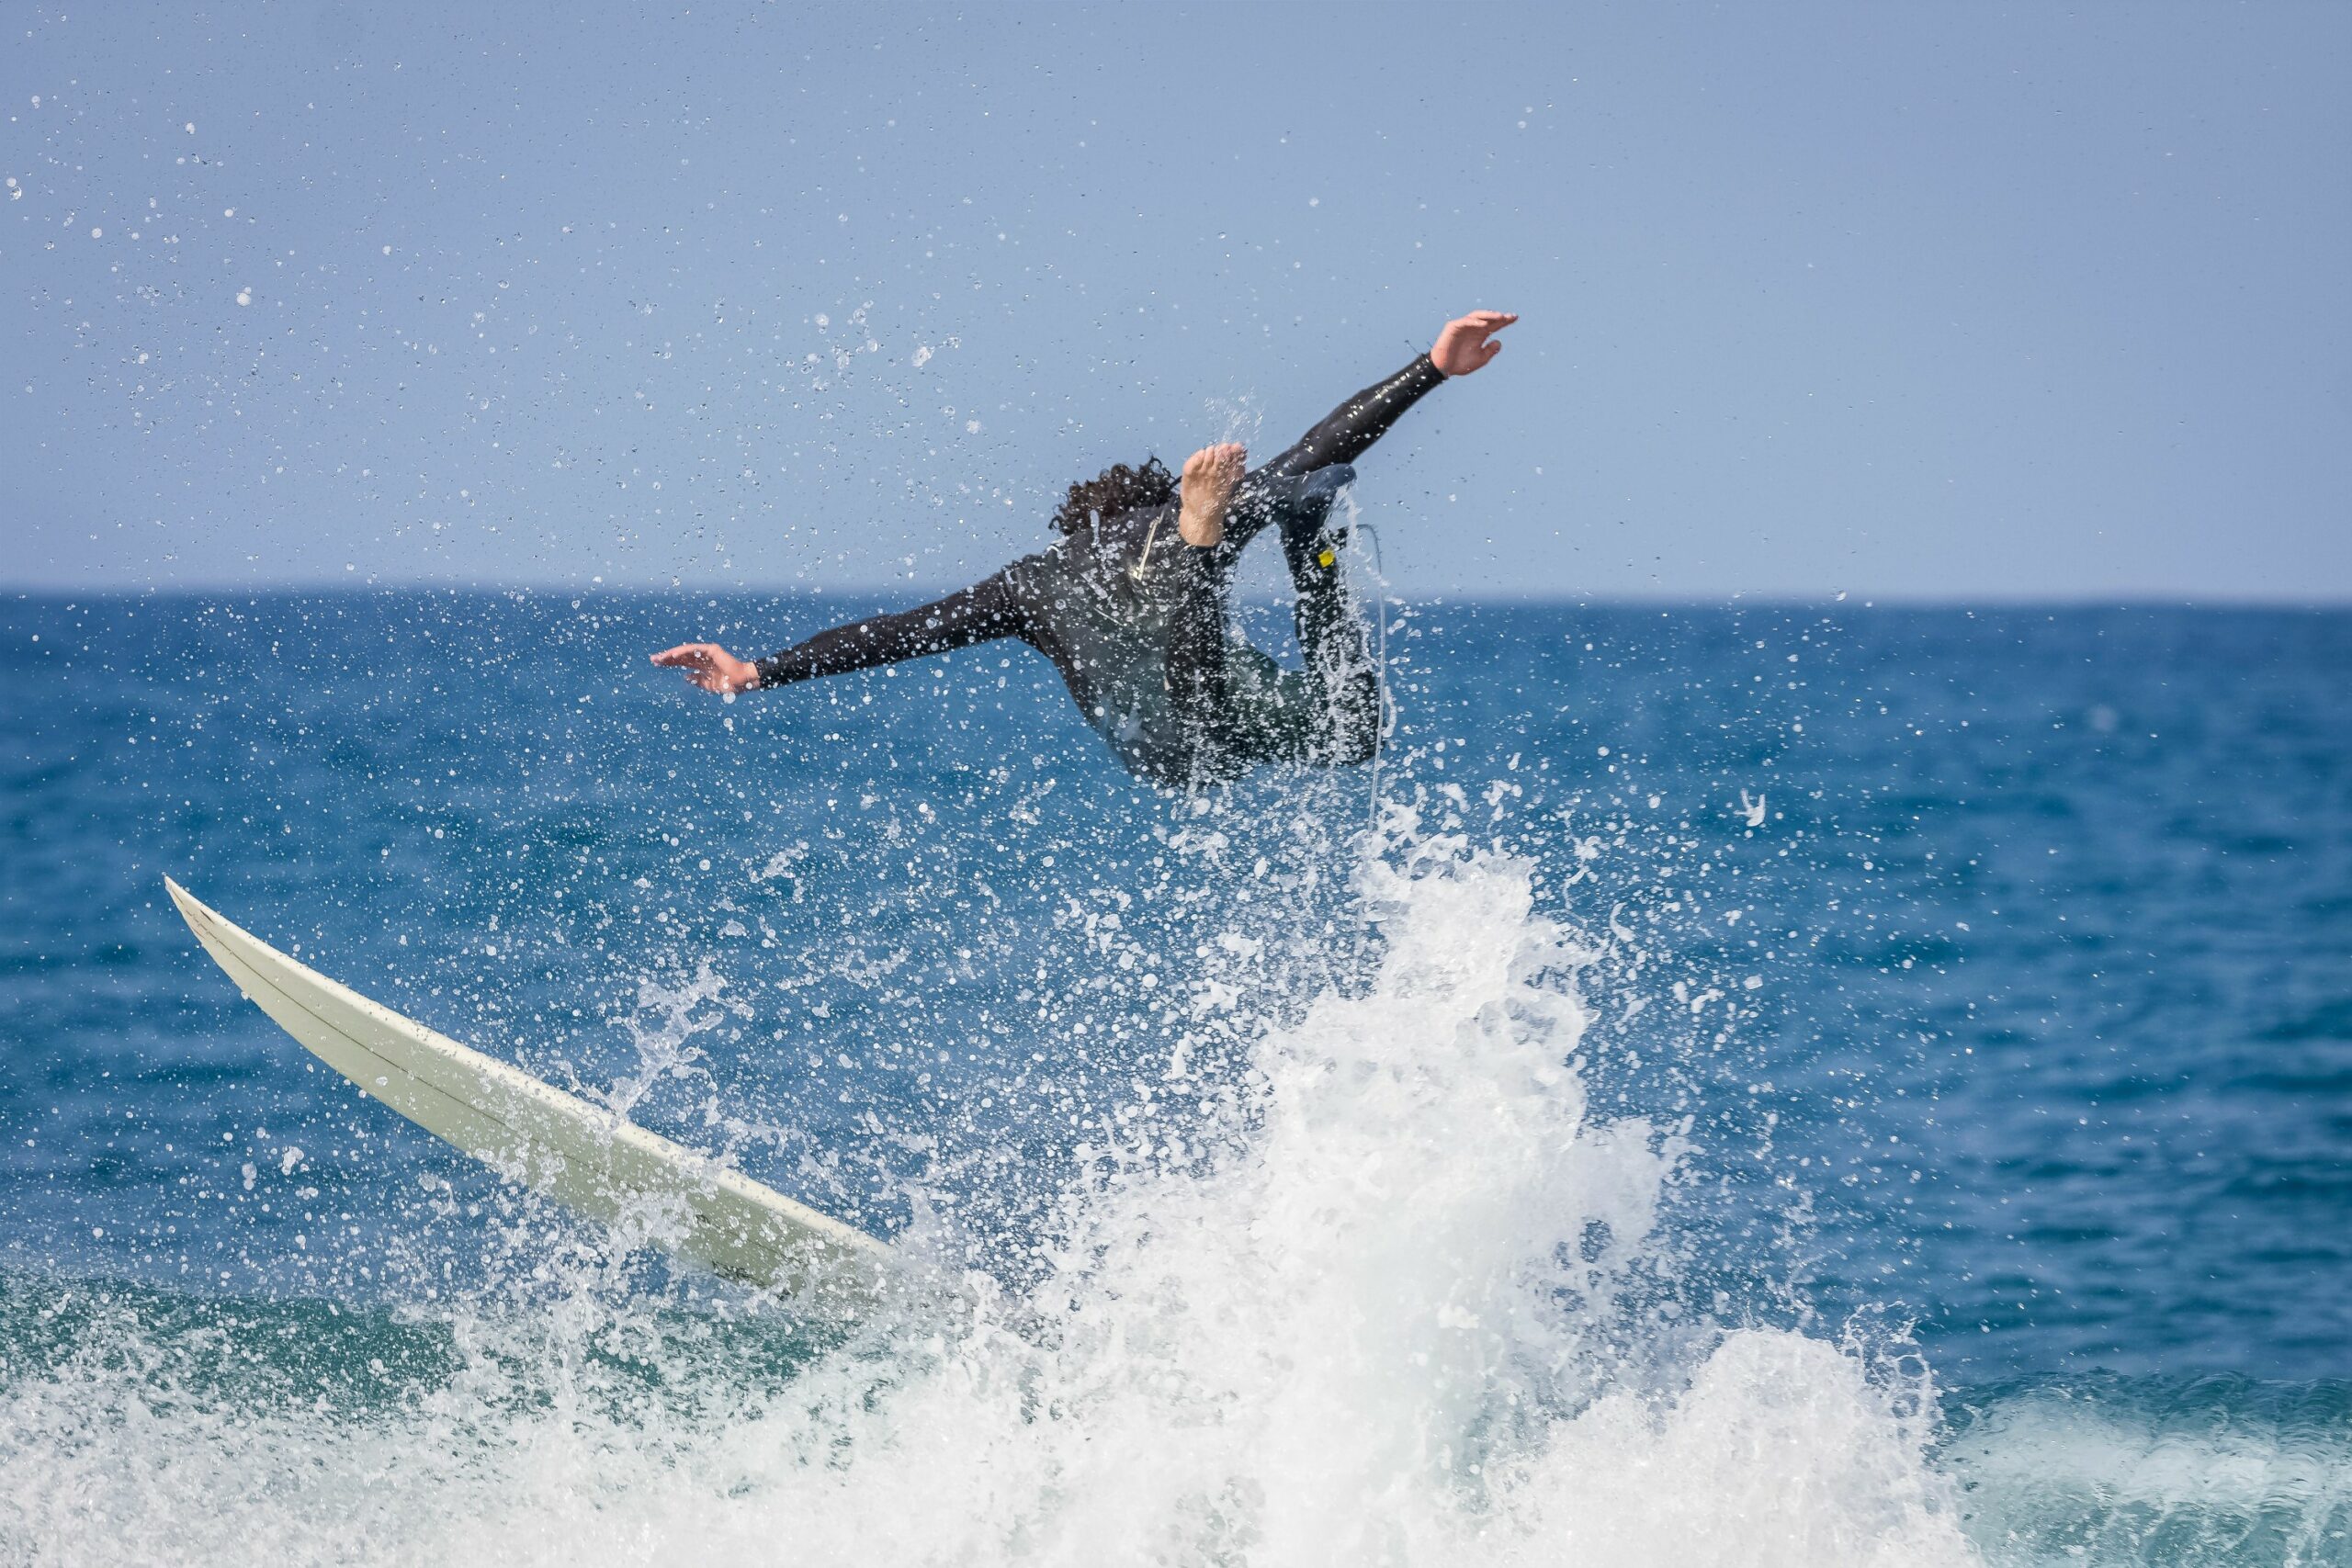 Surfer in wet suit riding board during wipeout.